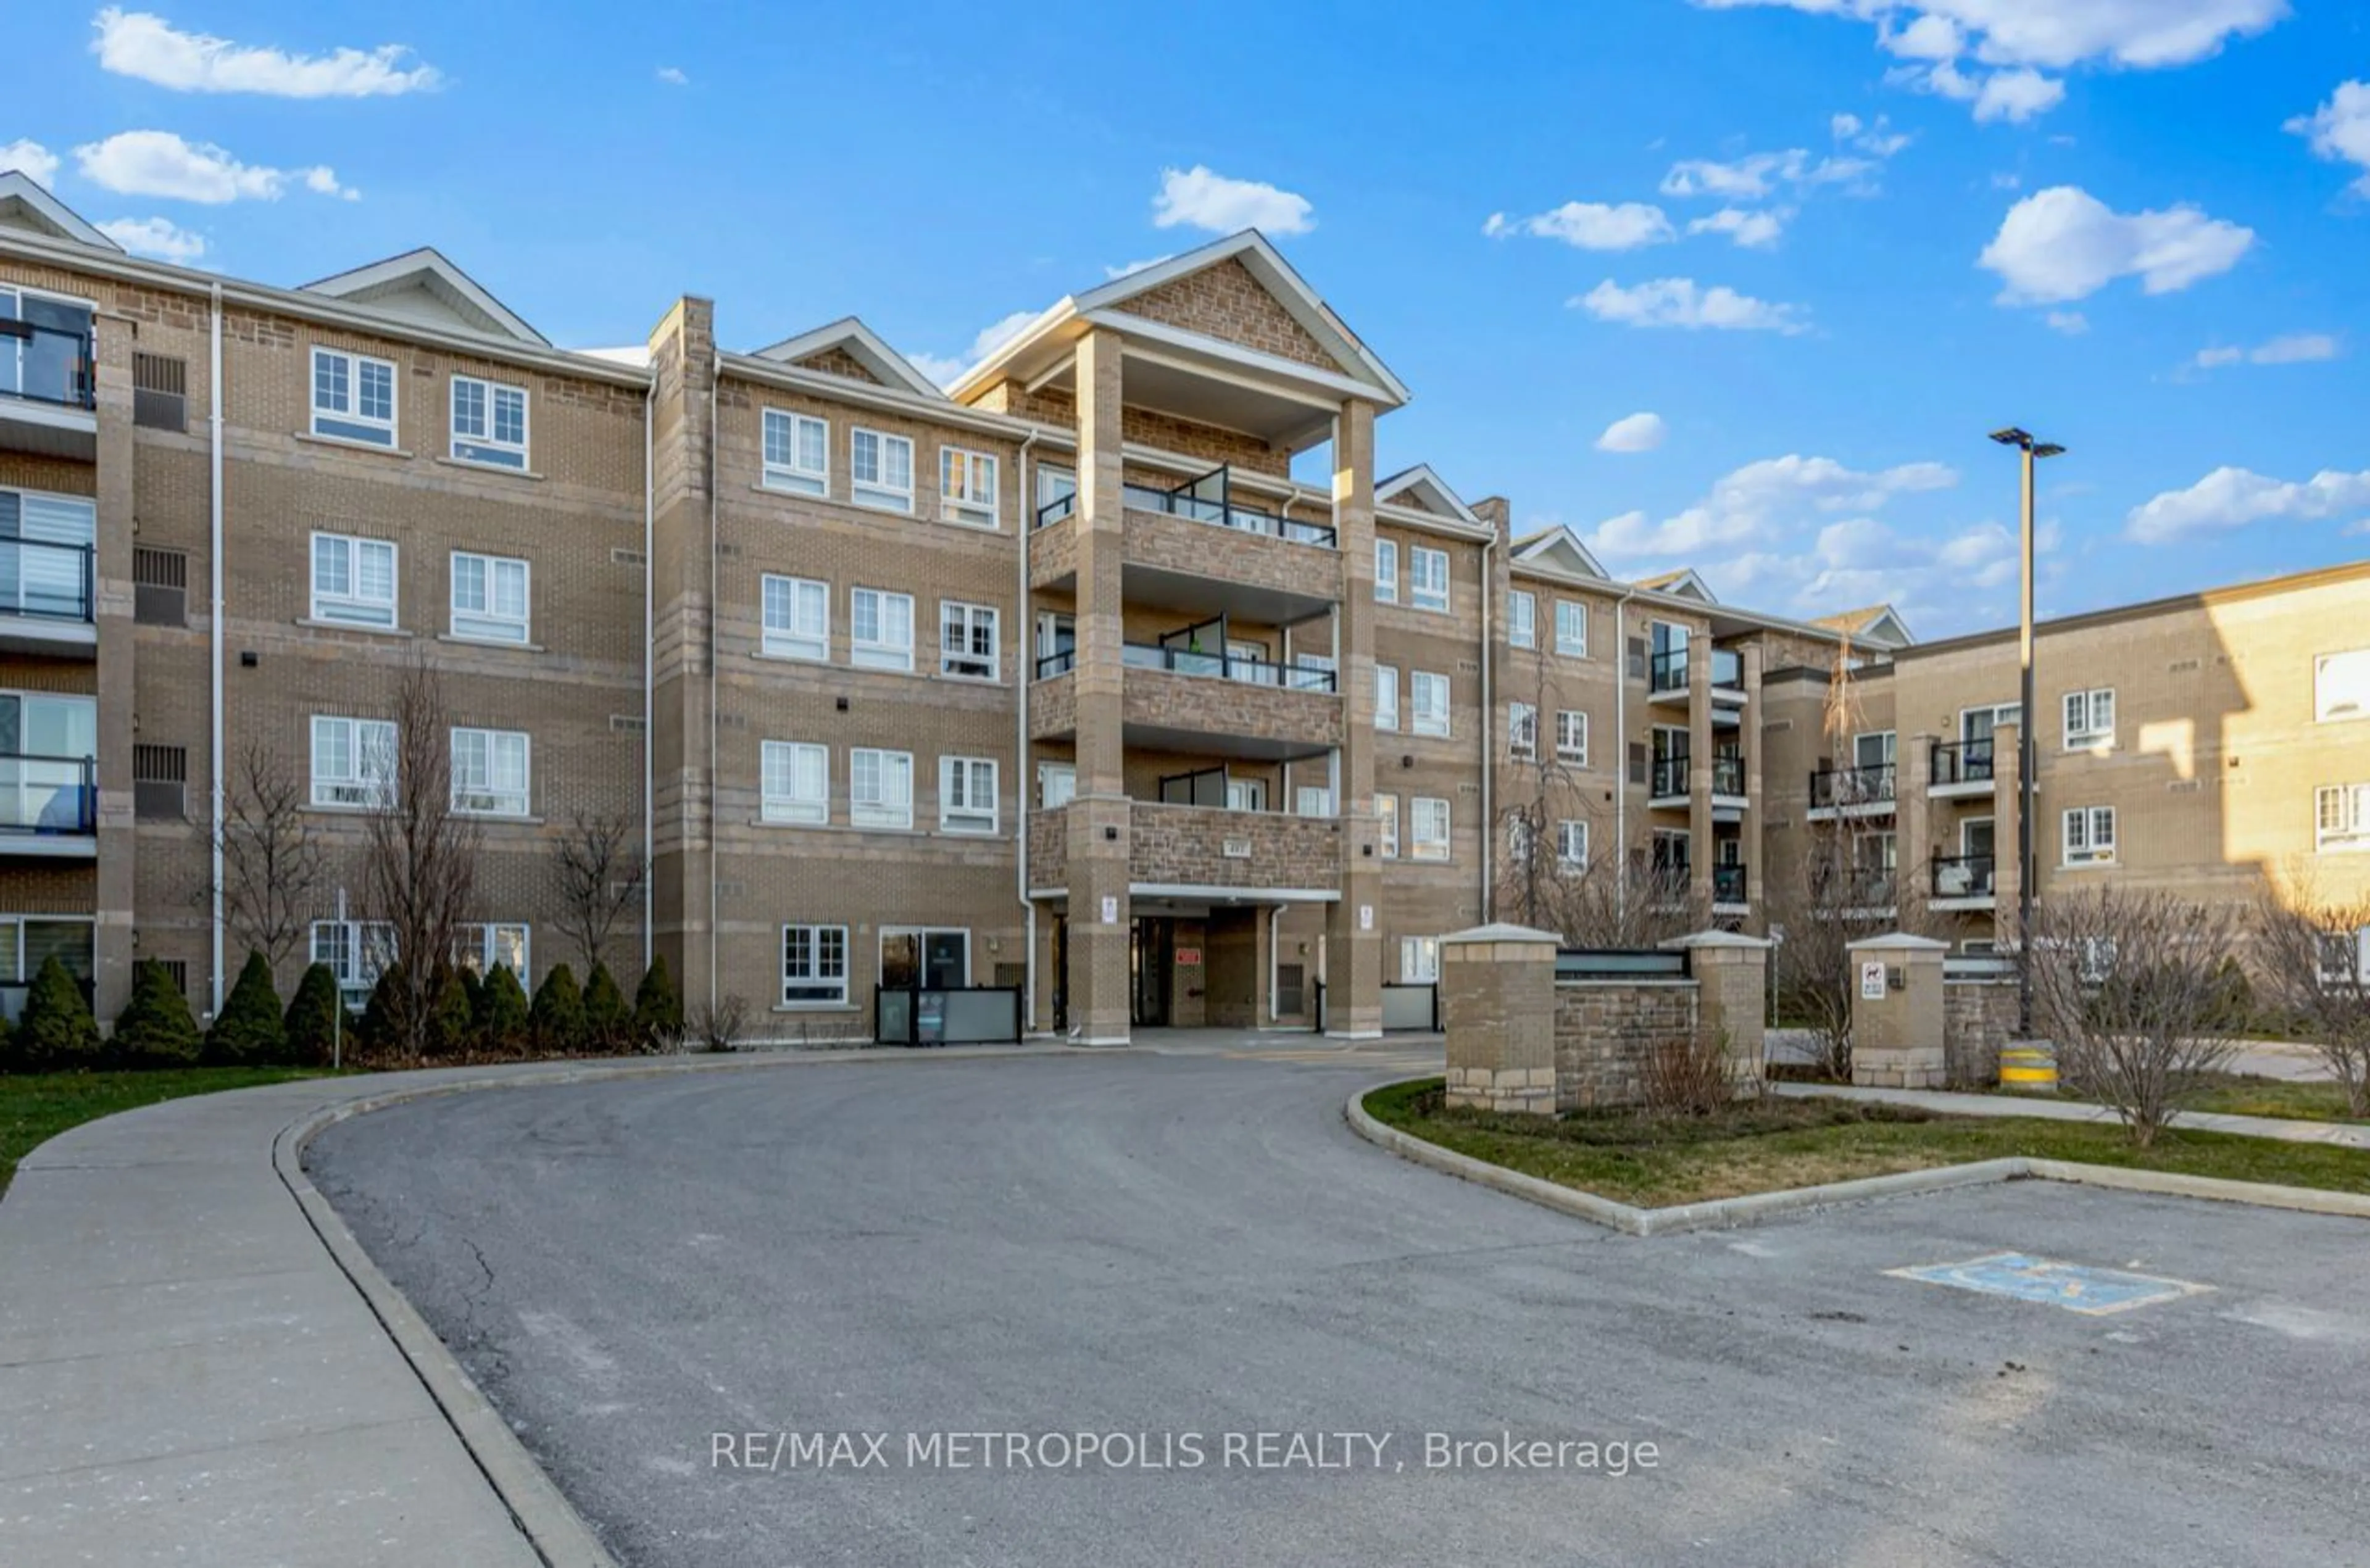 A pic from exterior of the house or condo for 481 Rupert Ave #2105, Whitchurch-Stouffville Ontario L4A 1Y7